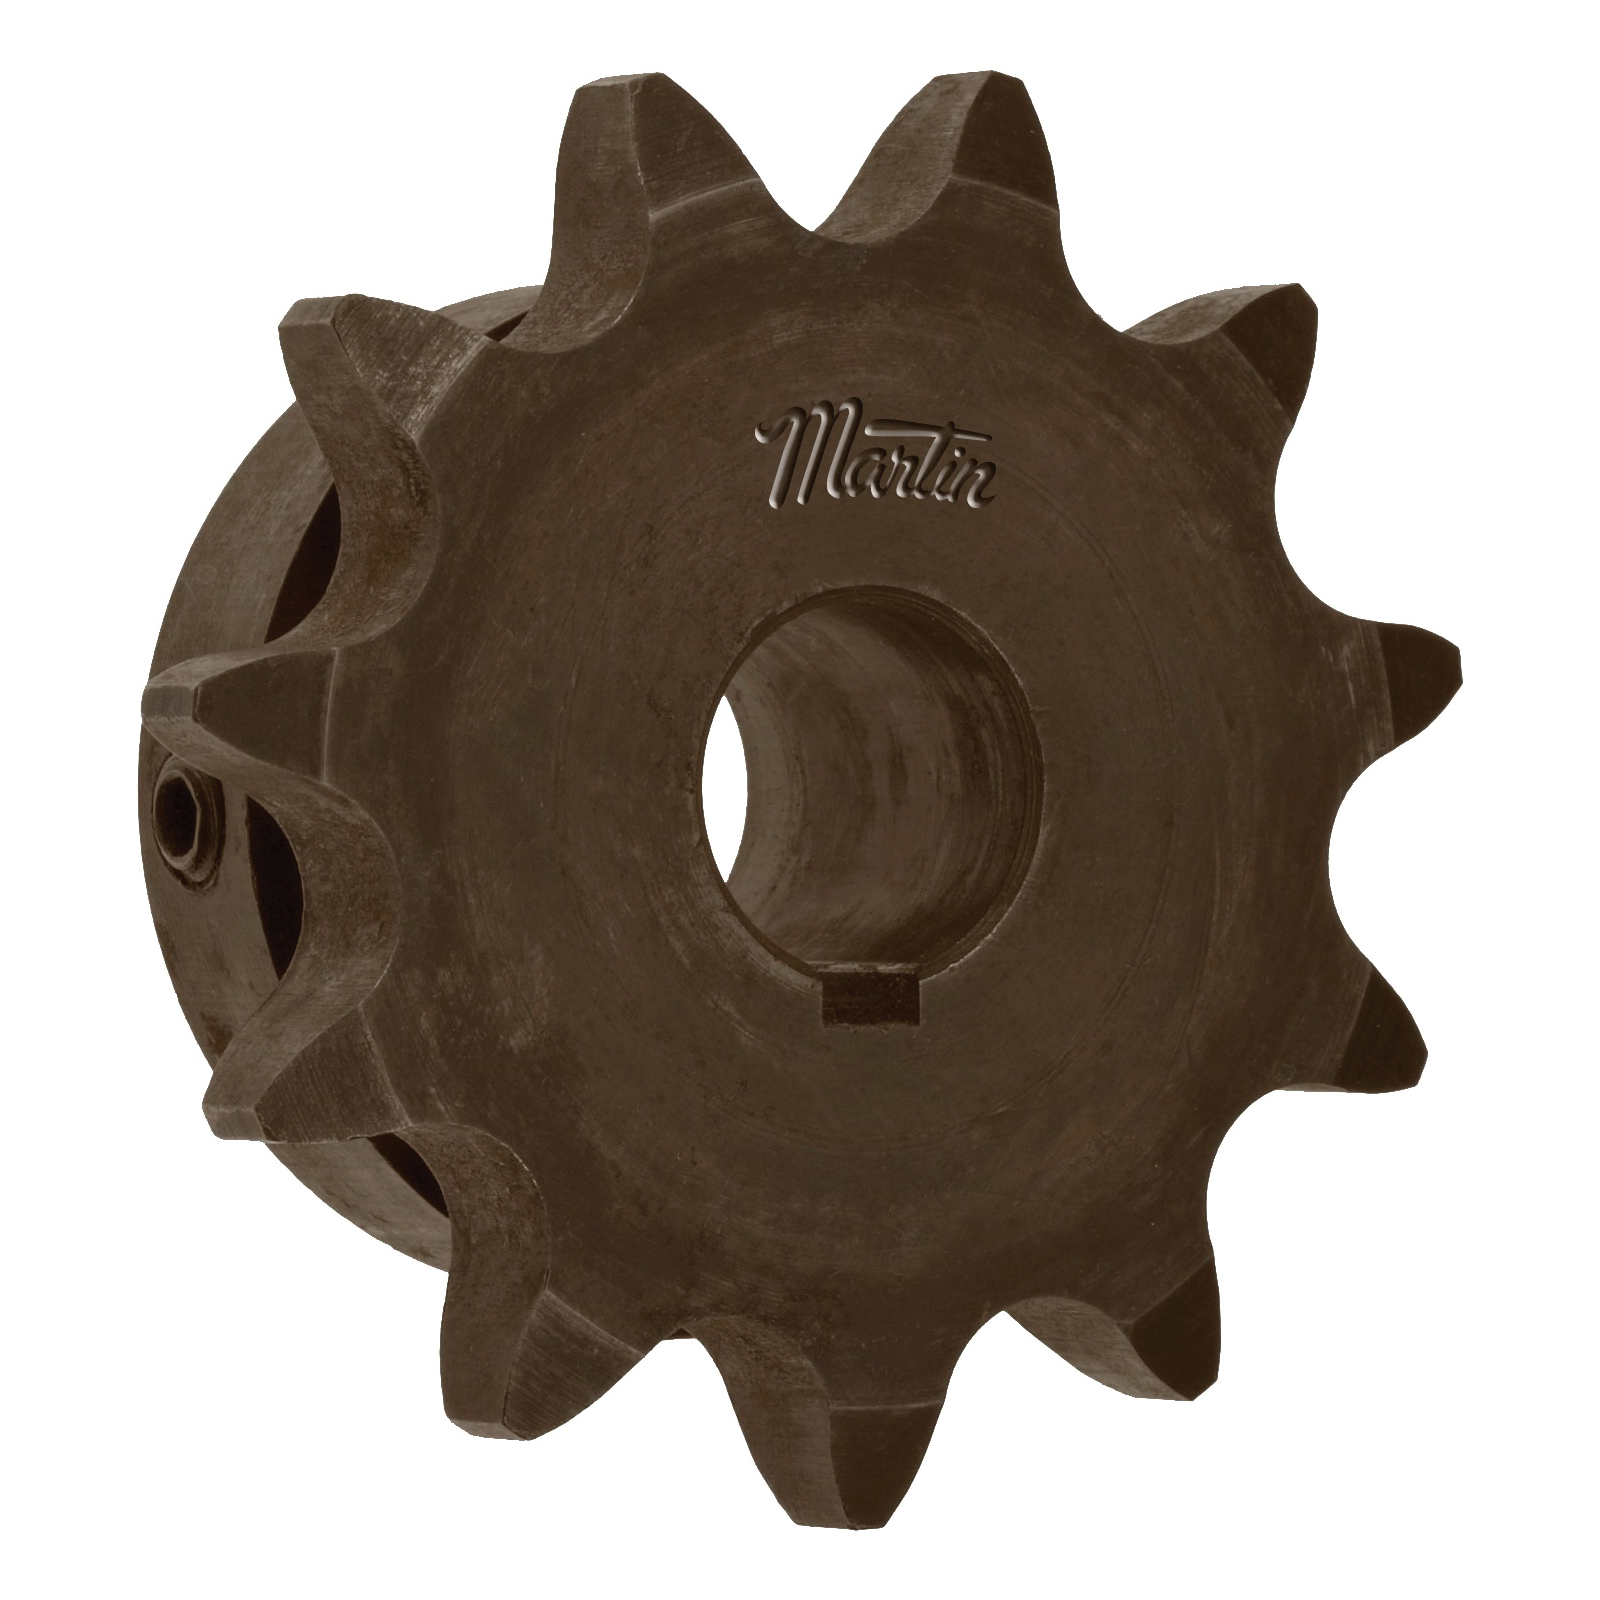 60 Chain Size Sprocket 18# of Teeth 1-1/4 Bore Dia 